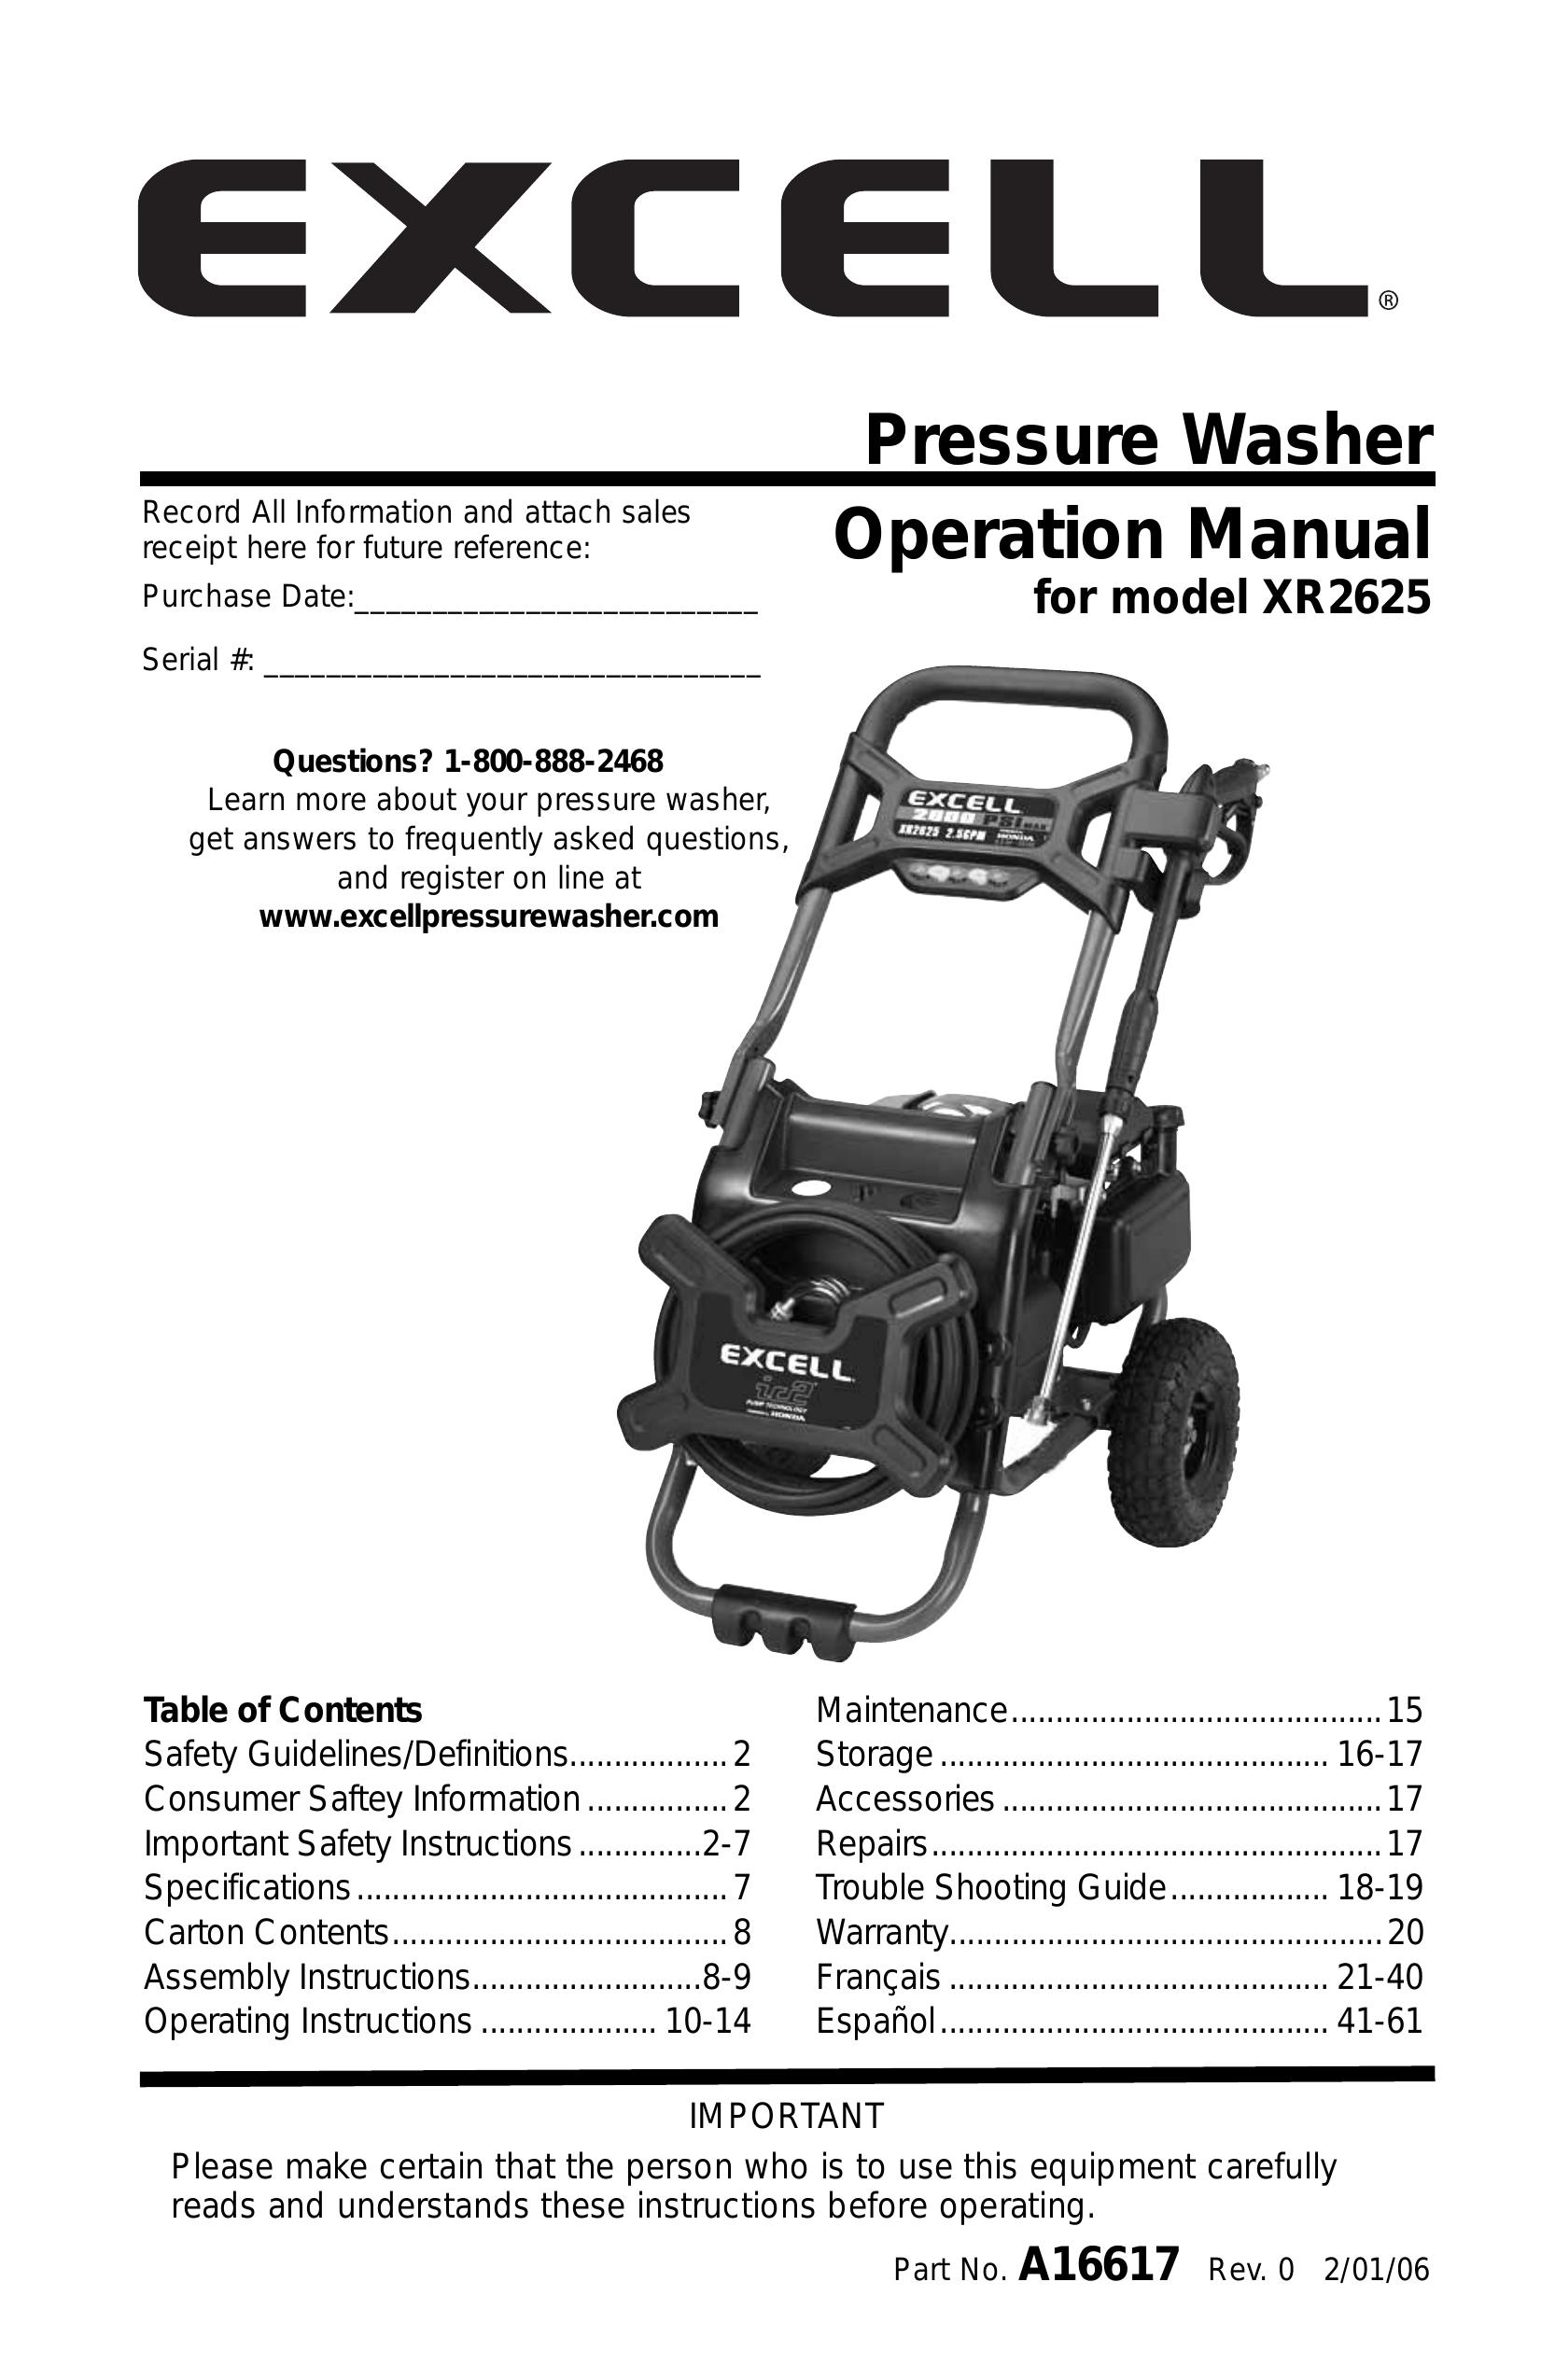 DeVillbiss Air Power Company A16617 Pressure Washer User Manual